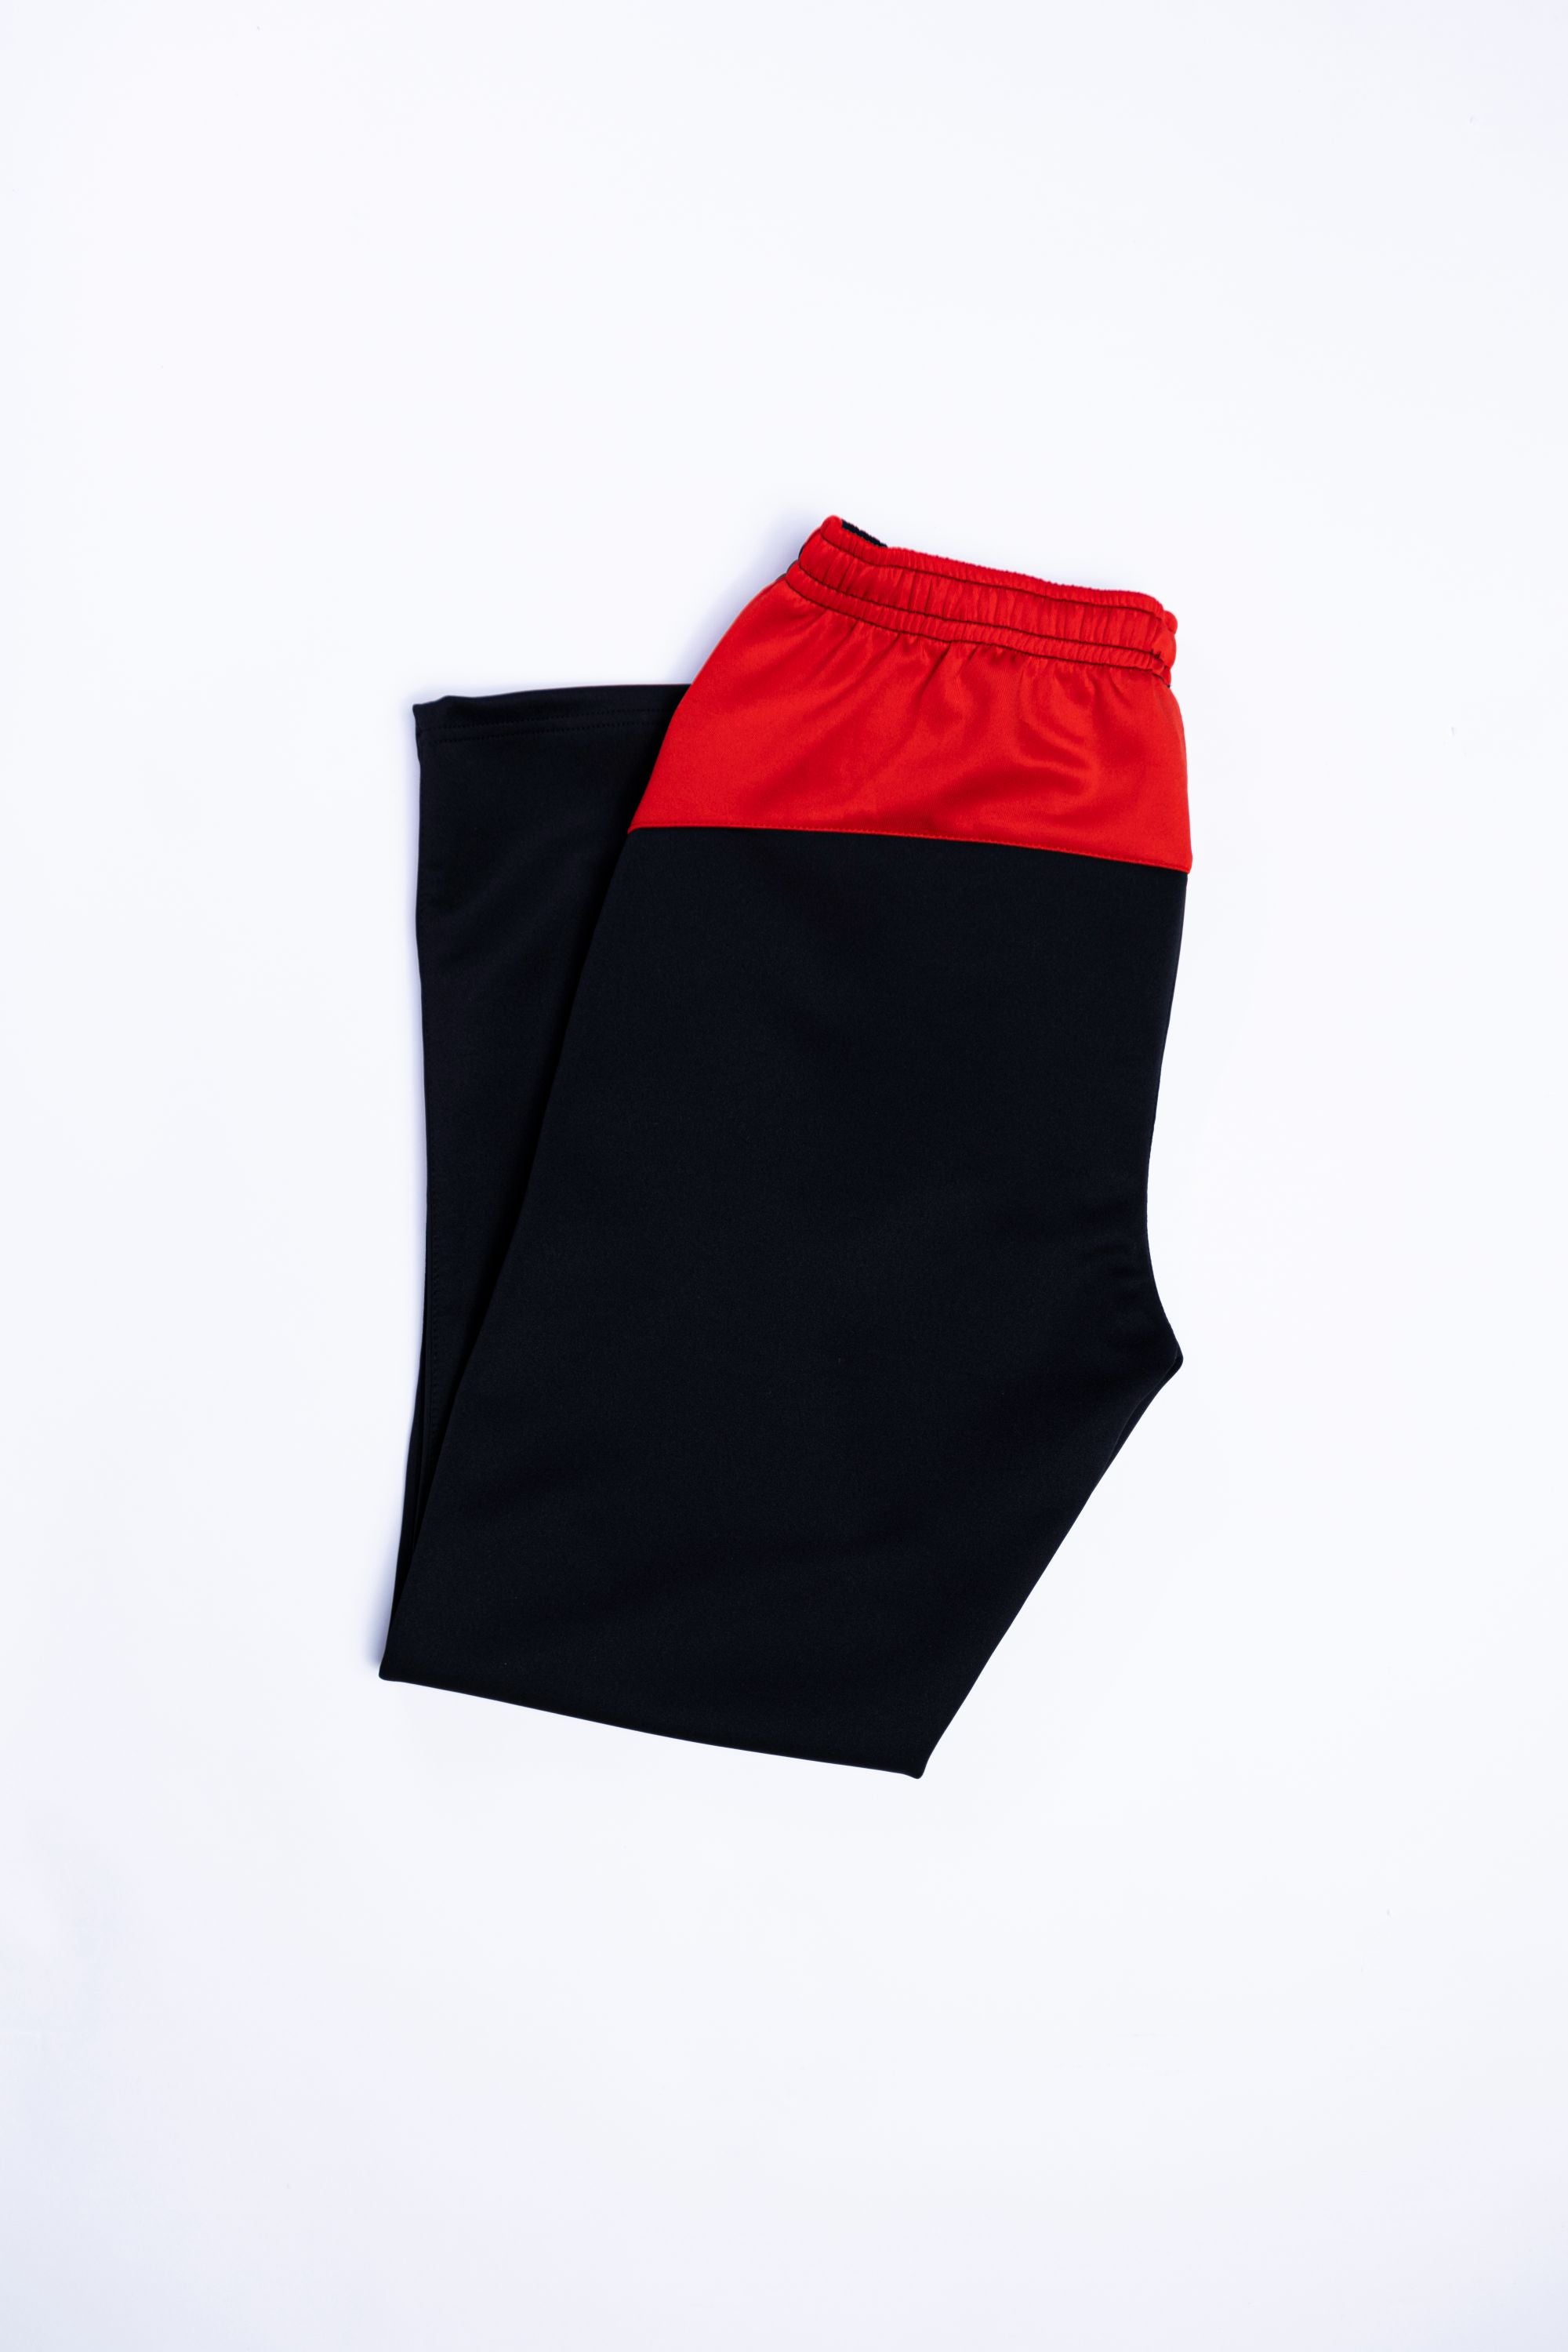 MEN TROUSER BLACK AND RED COLOUR